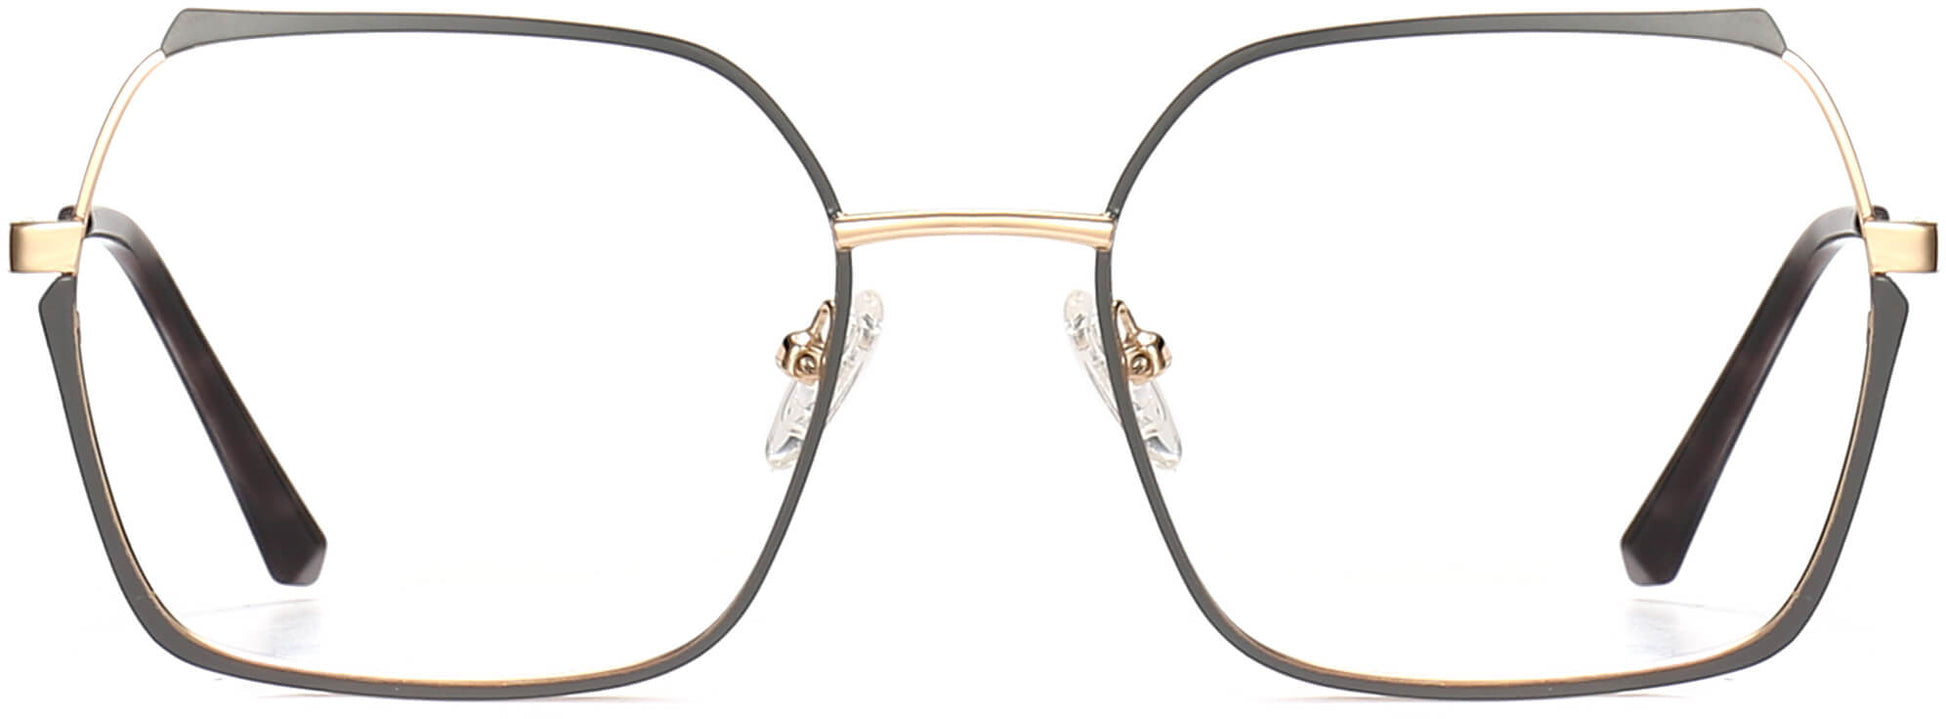 Forrest Square Gray Eyeglasses from ANRRI, front view